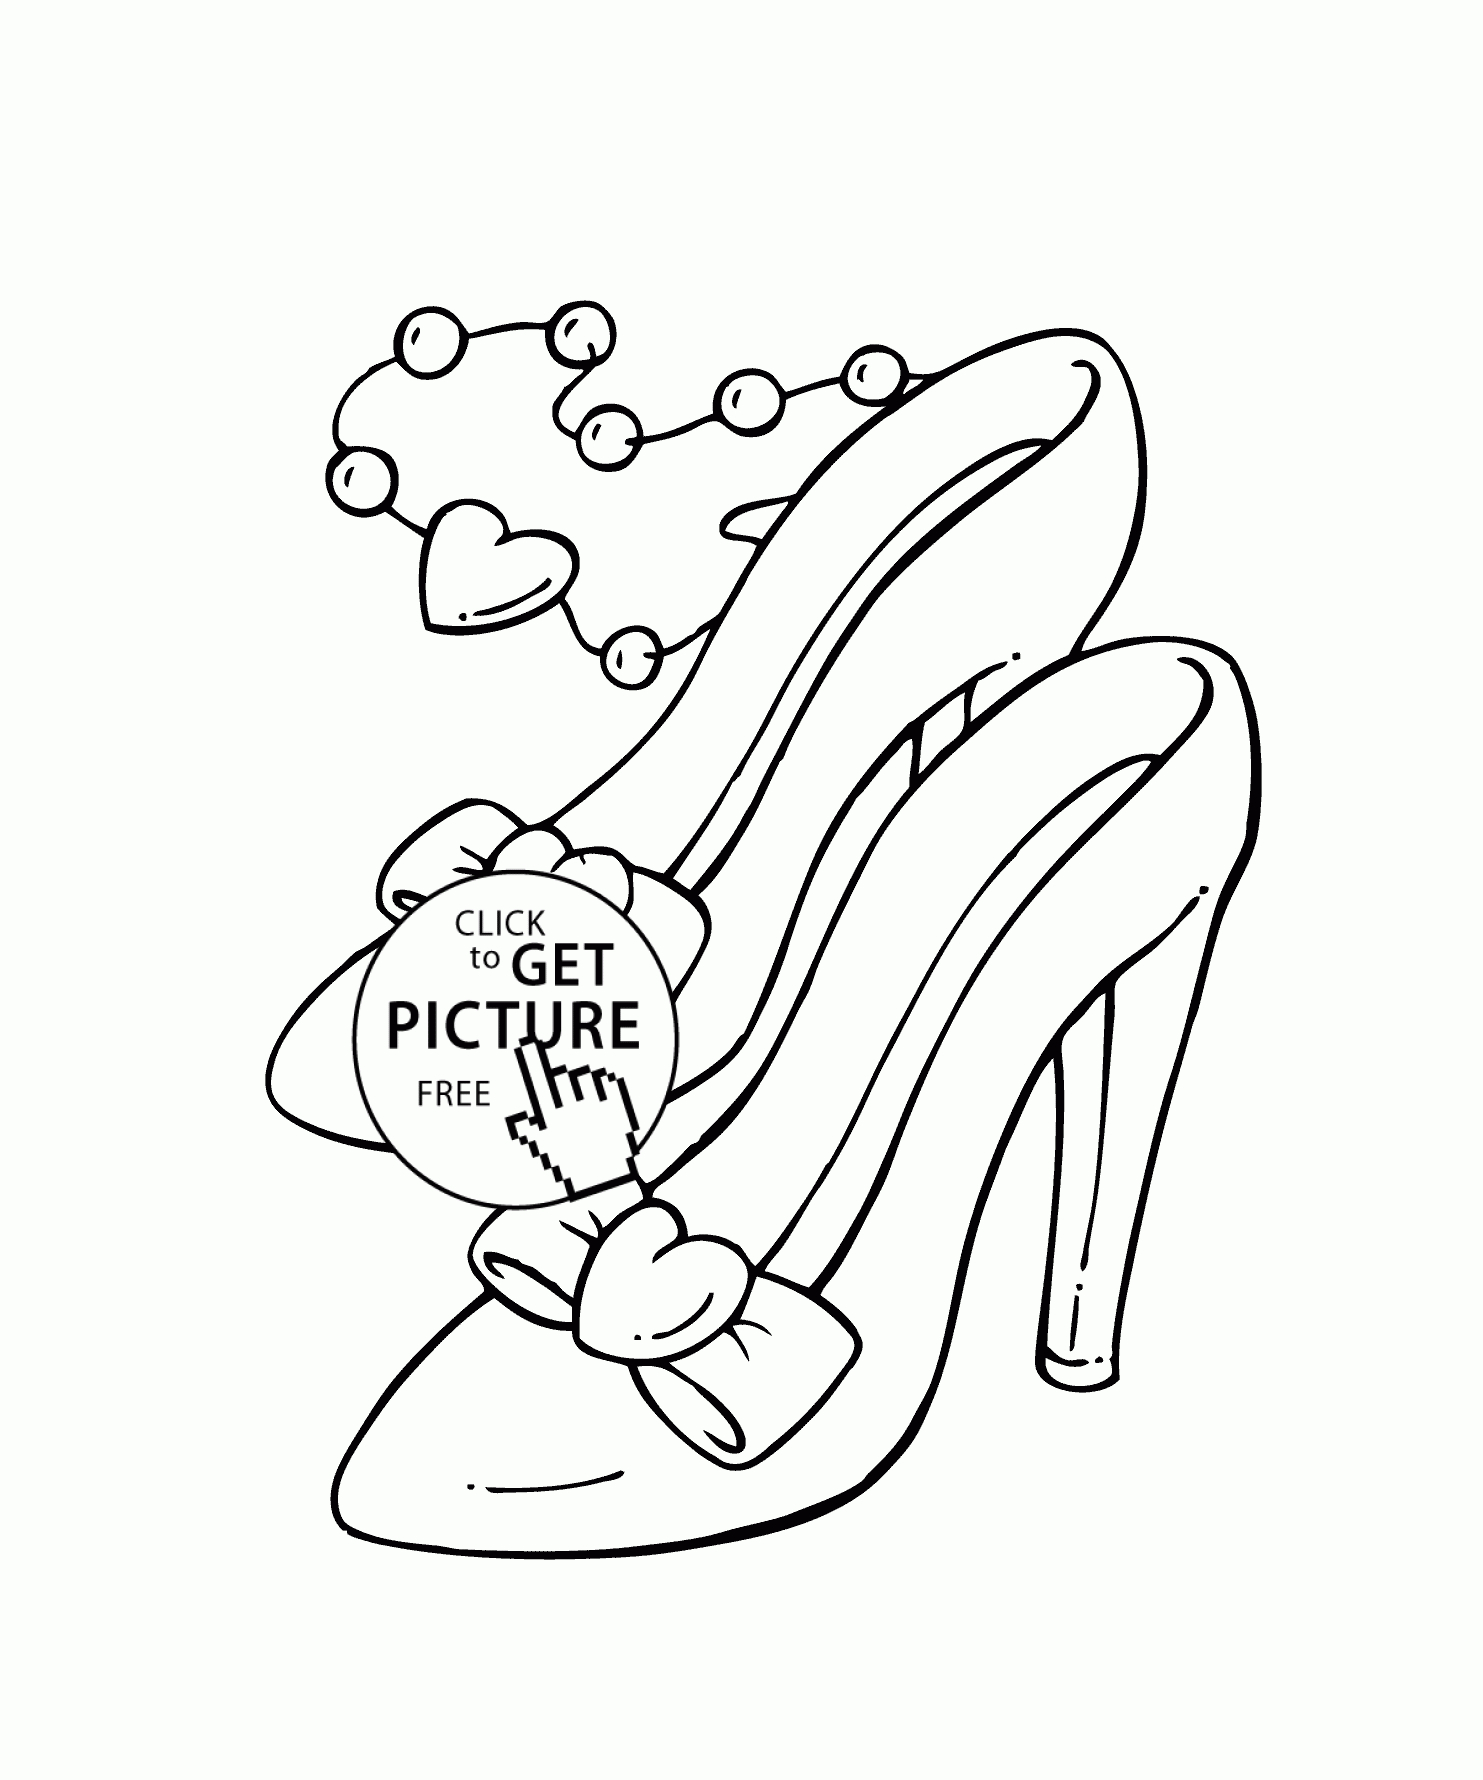 Beautiful Shoes Coloring Page For Girls, Printable Free | Coloing - Free Printable Shoe Print Template